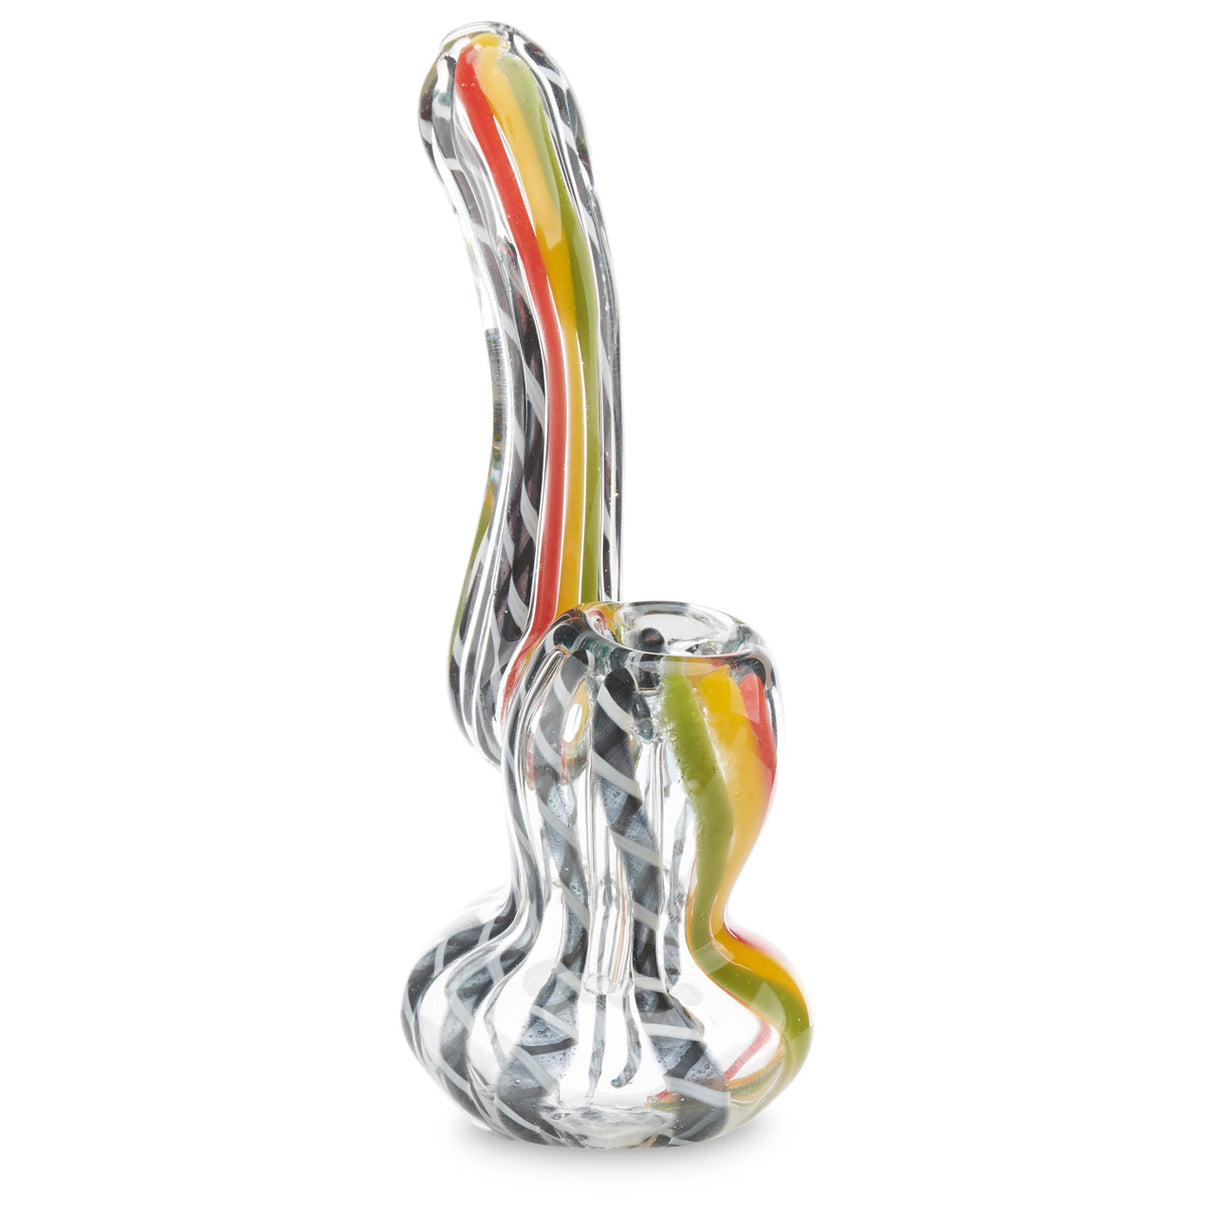 Small Sherlock Bubbler Pipe for dry herb